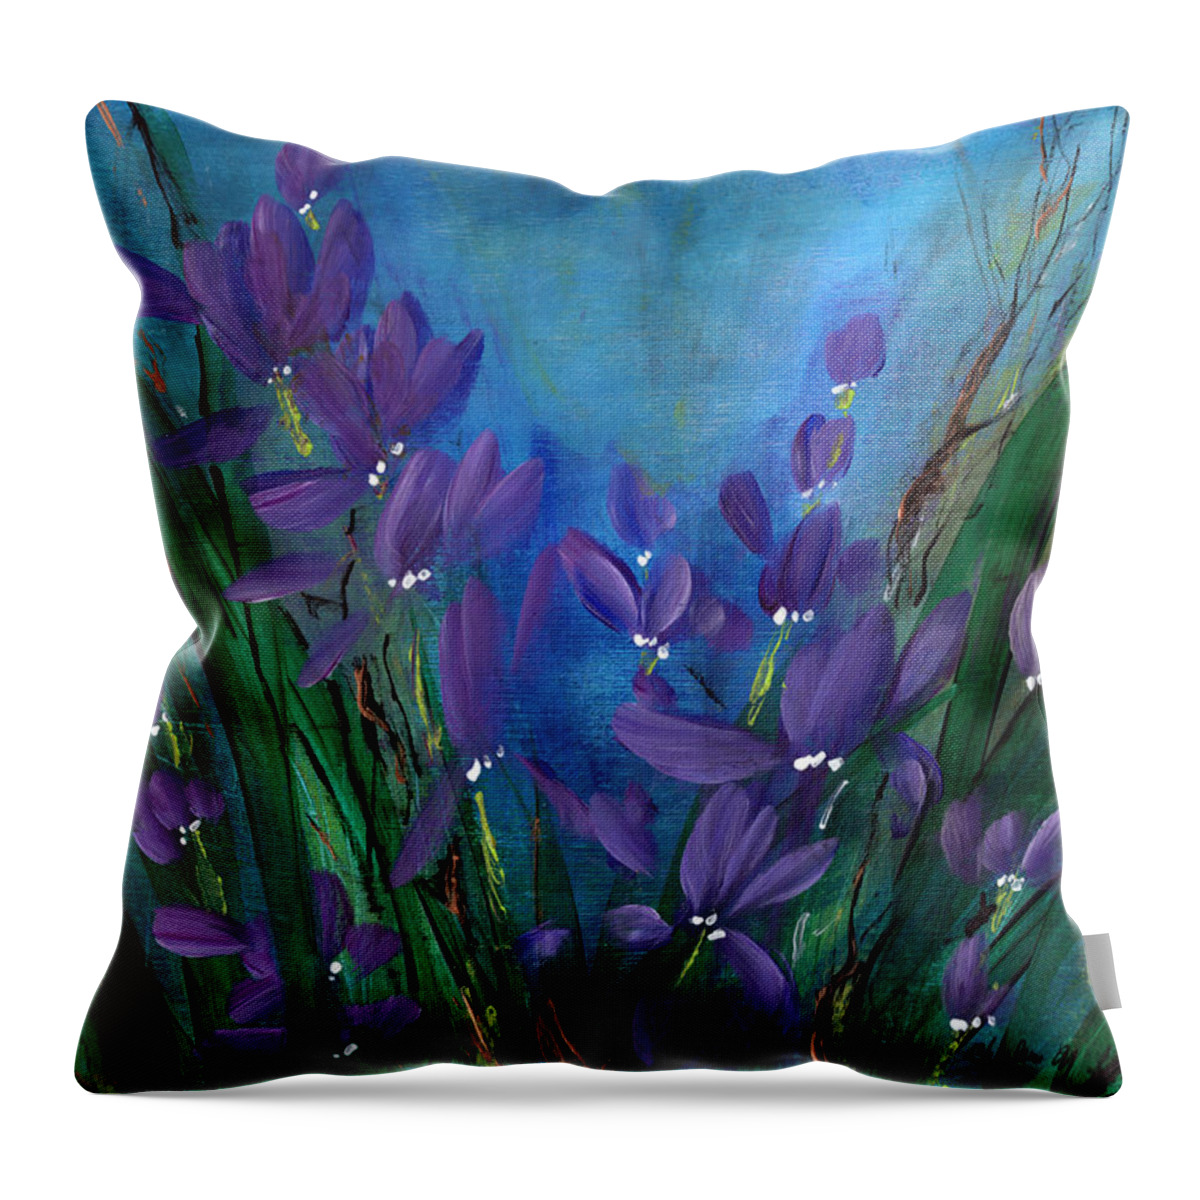 Garden Throw Pillow featuring the painting Imaginary Garden - Dancing Orchids by Charlene Fuhrman-Schulz